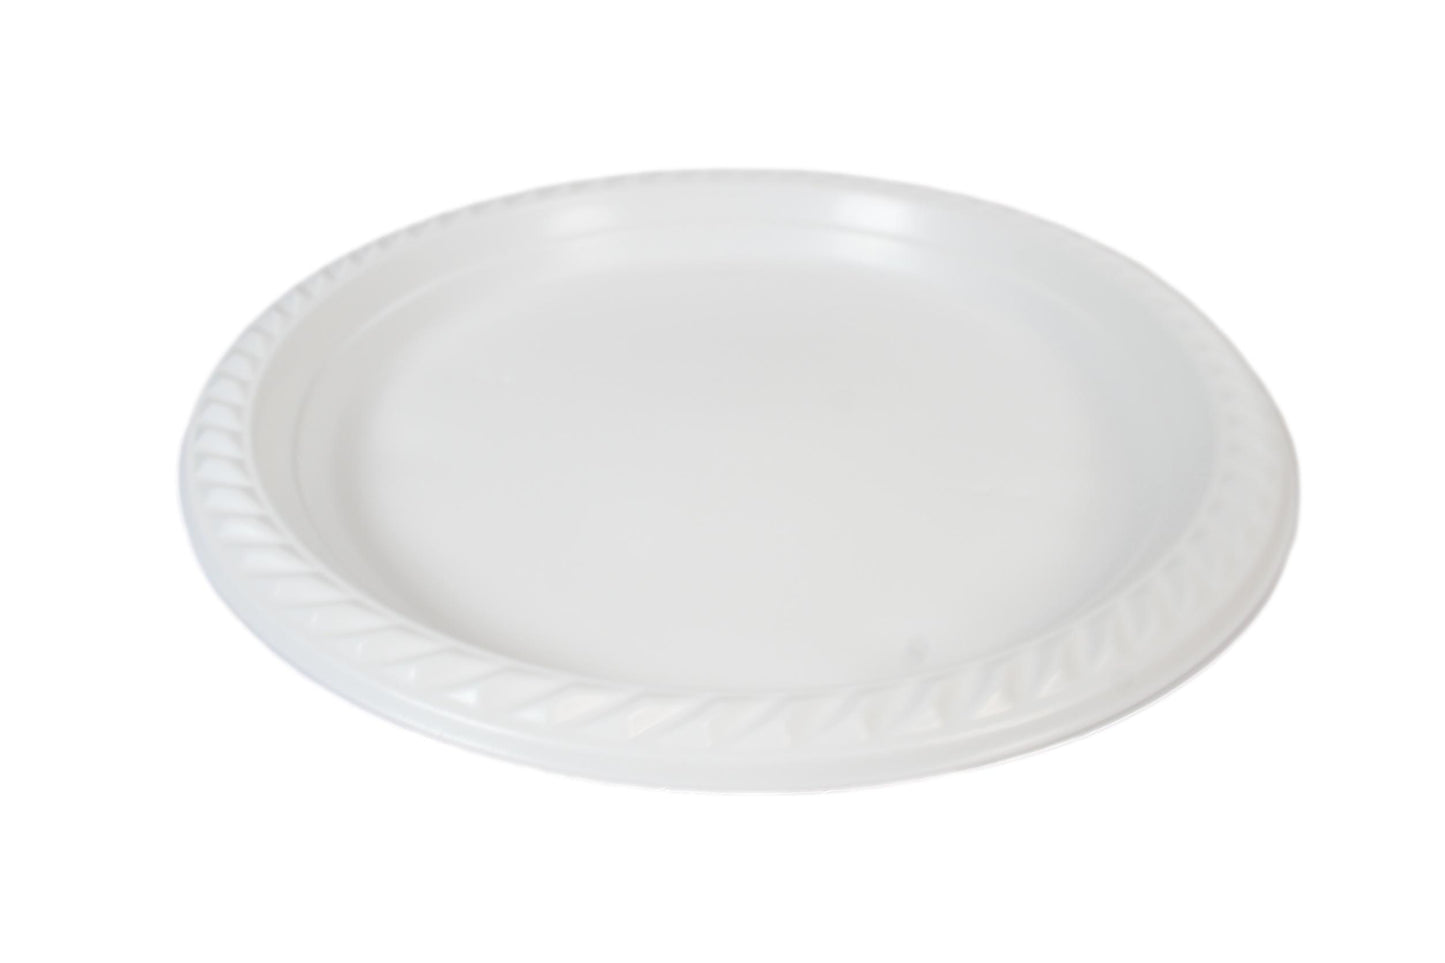 9" White Plastic Plates For Picnics Birthdays Parties Pack of 100  2455 (Parcel Rate)